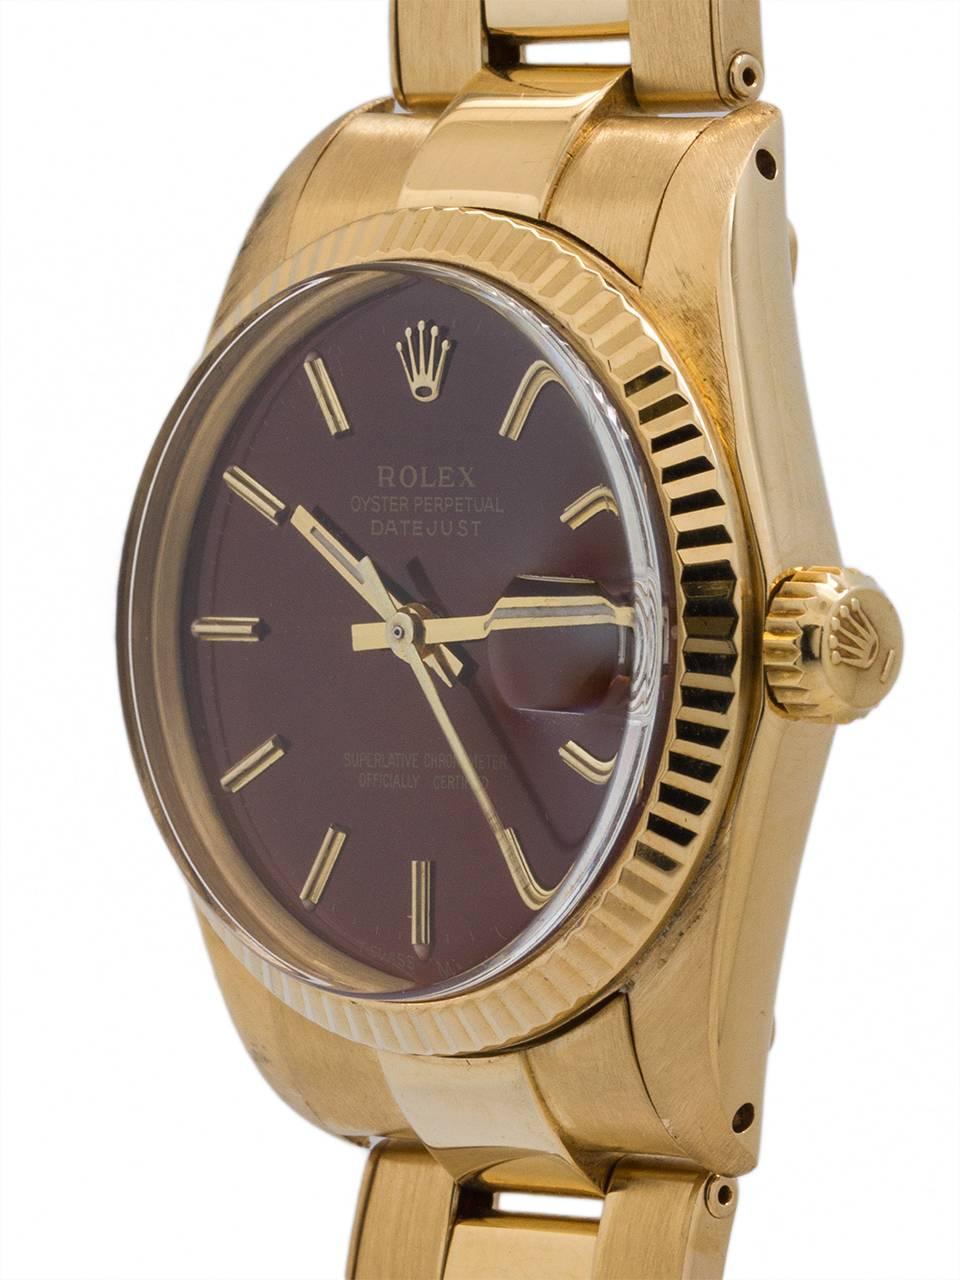 
Rolex midsize Datejust 18K YG ref 6827 circa 1982. Featuring 31mm diameter case with fluted bezel, acrylic crystal and custom root beer colored dial with applied gold indexes and gold baton hands. Powered by self winding movement with sweep seconds